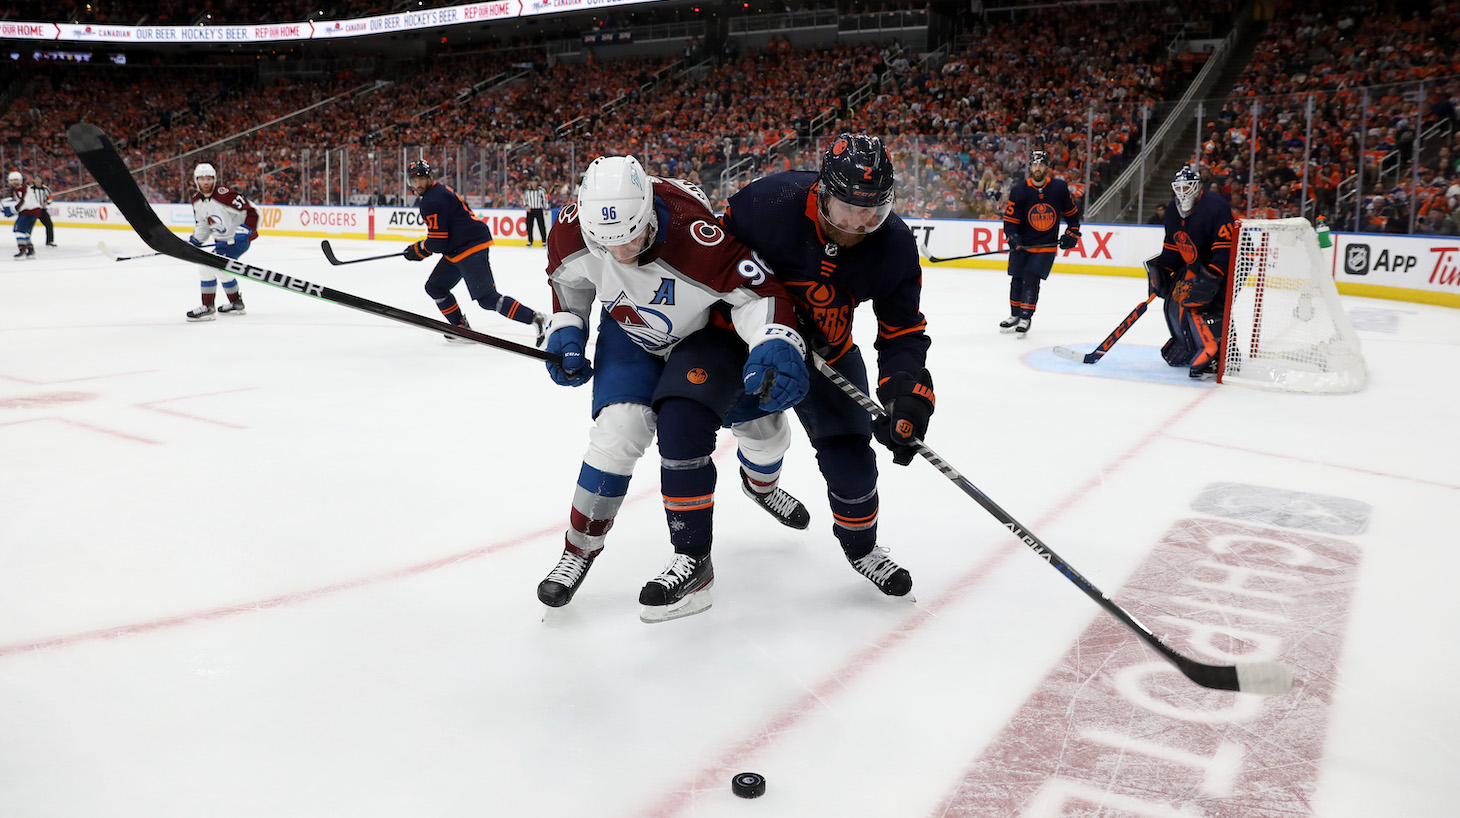 EDMONTON, ALBERTA - JUNE 04: Mikko Rantanen #96 of the Colorado Avalanche skates against Duncan Keith #2 of the Edmonton Oilers in the third period in Game Three of the Western Conference Final of the 2022 Stanley Cup Playoffs at Rogers Place on June 04, 2022 in Edmonton, Alberta. (Photo by Codie McLachlan/Getty Images)